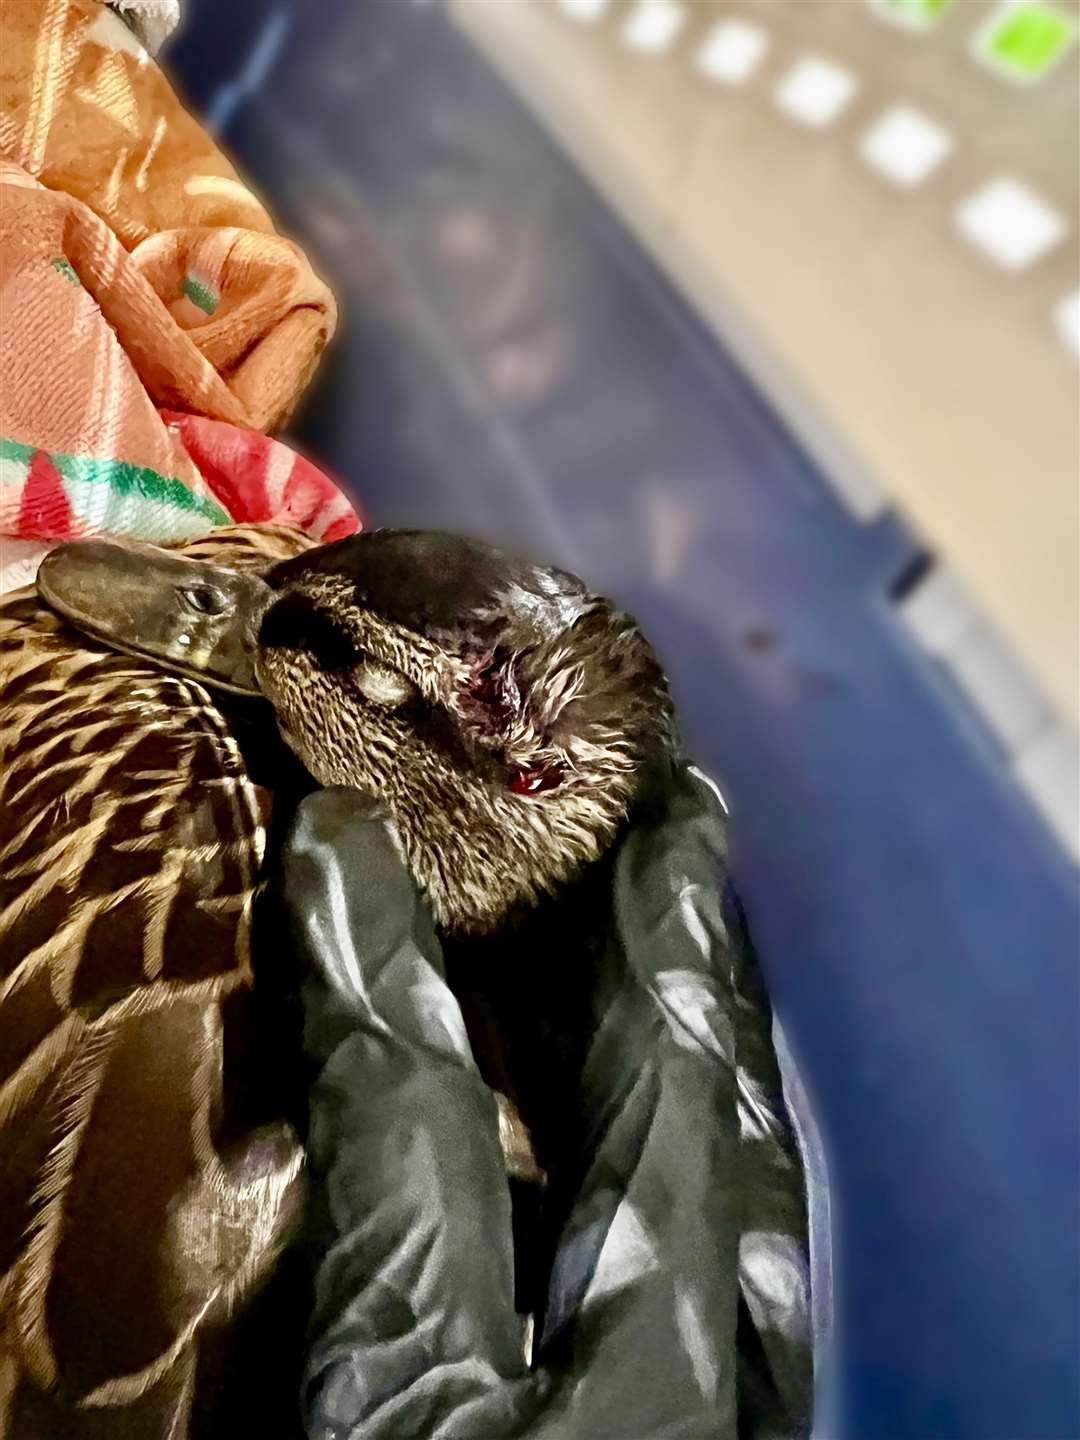 The rescued duck is now recuperating